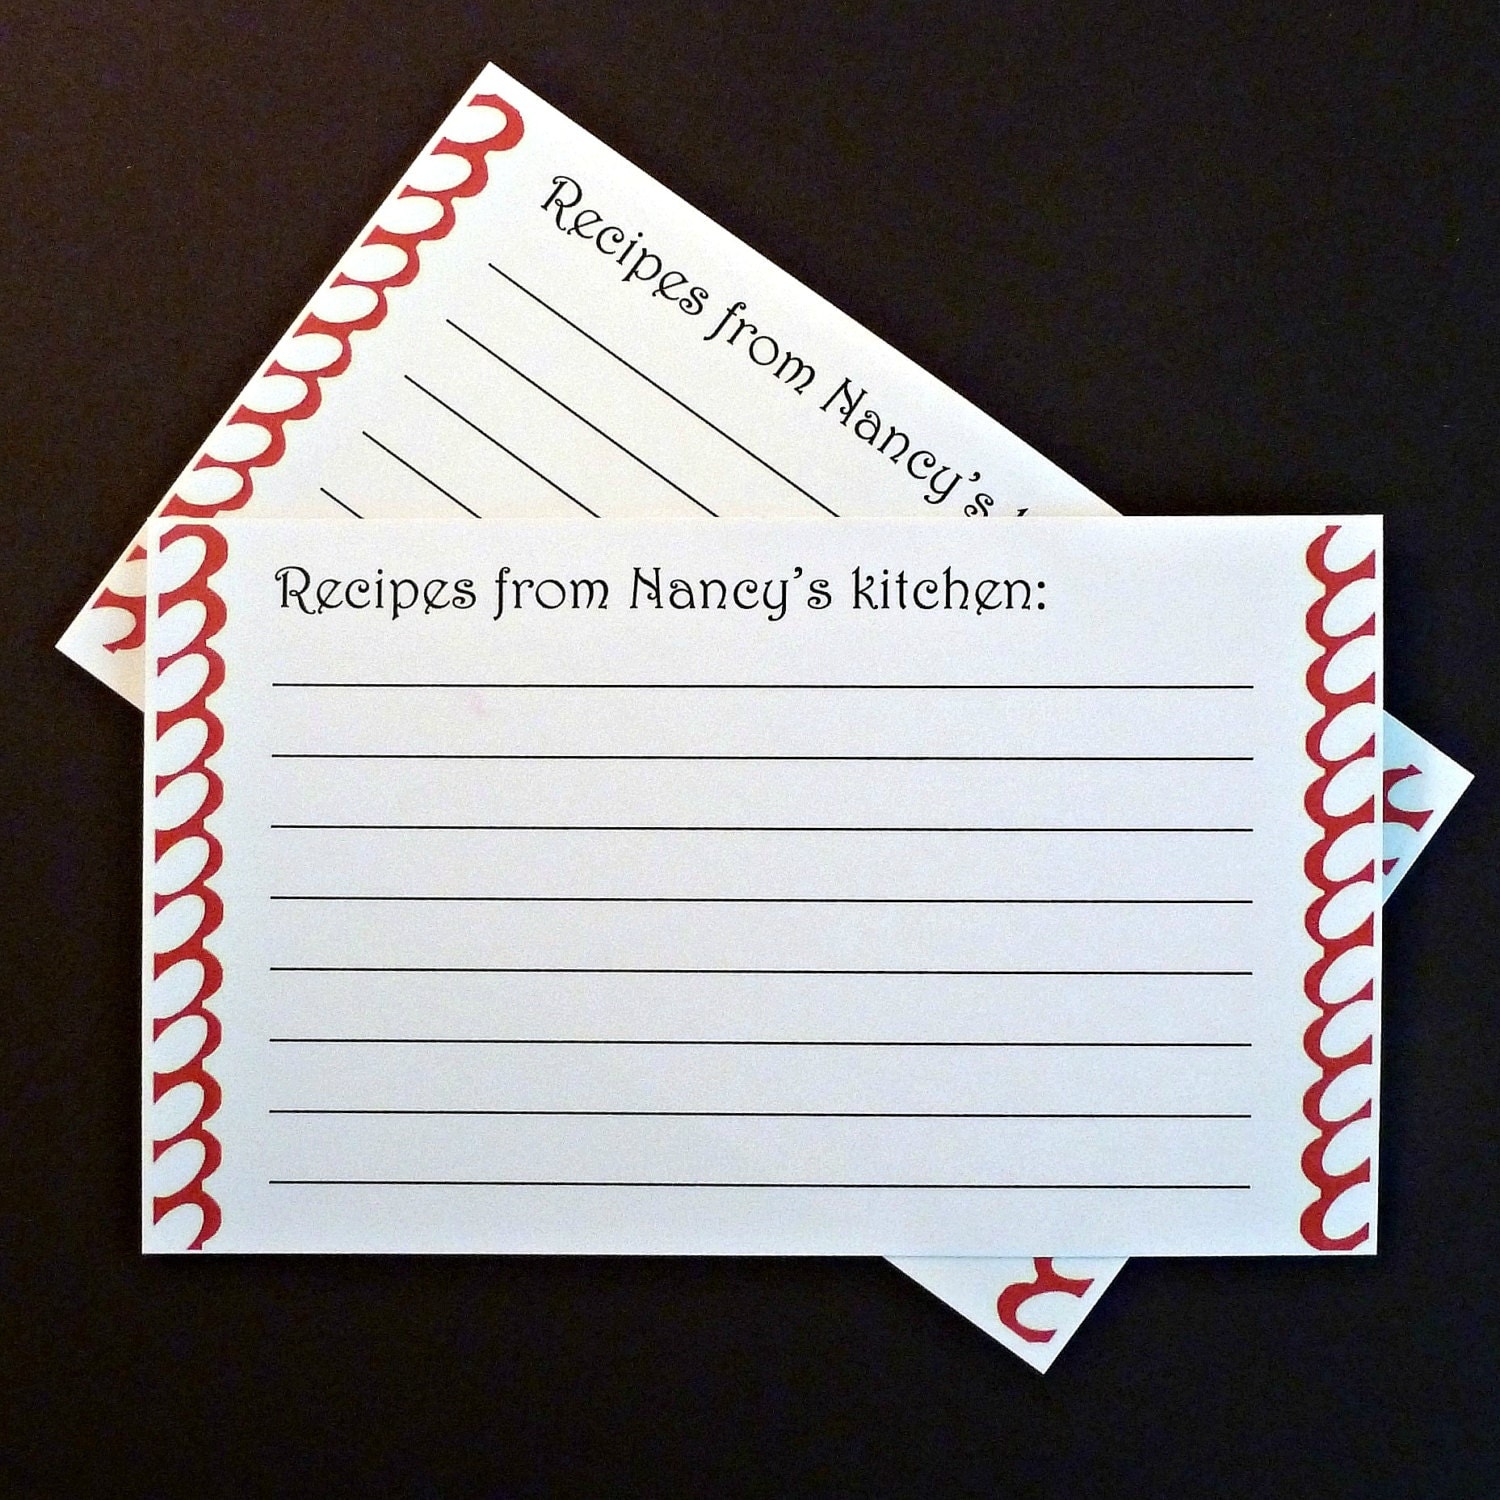 50-recipe-cards-3x5-cards-personalized-recipe-cards-customized